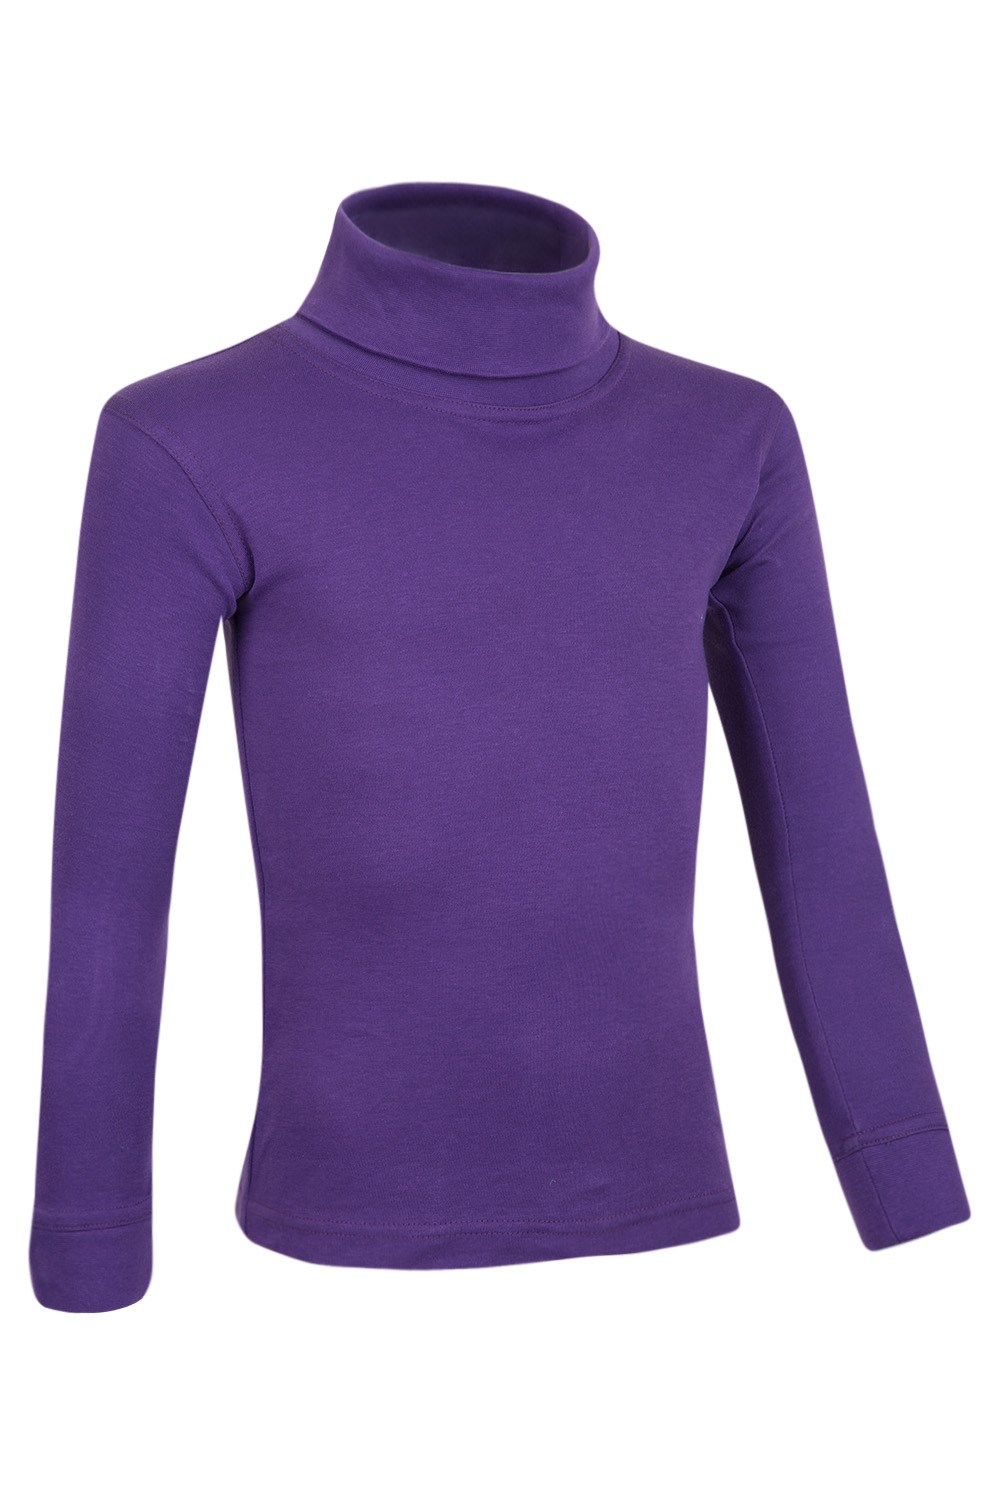 Extremely Soft Perfect for Children This Winter 100% Cotton Thermal Baselayer Lightweight Breathable Mountain Warehouse Meribel Kids Cotton Roll Neck Top 